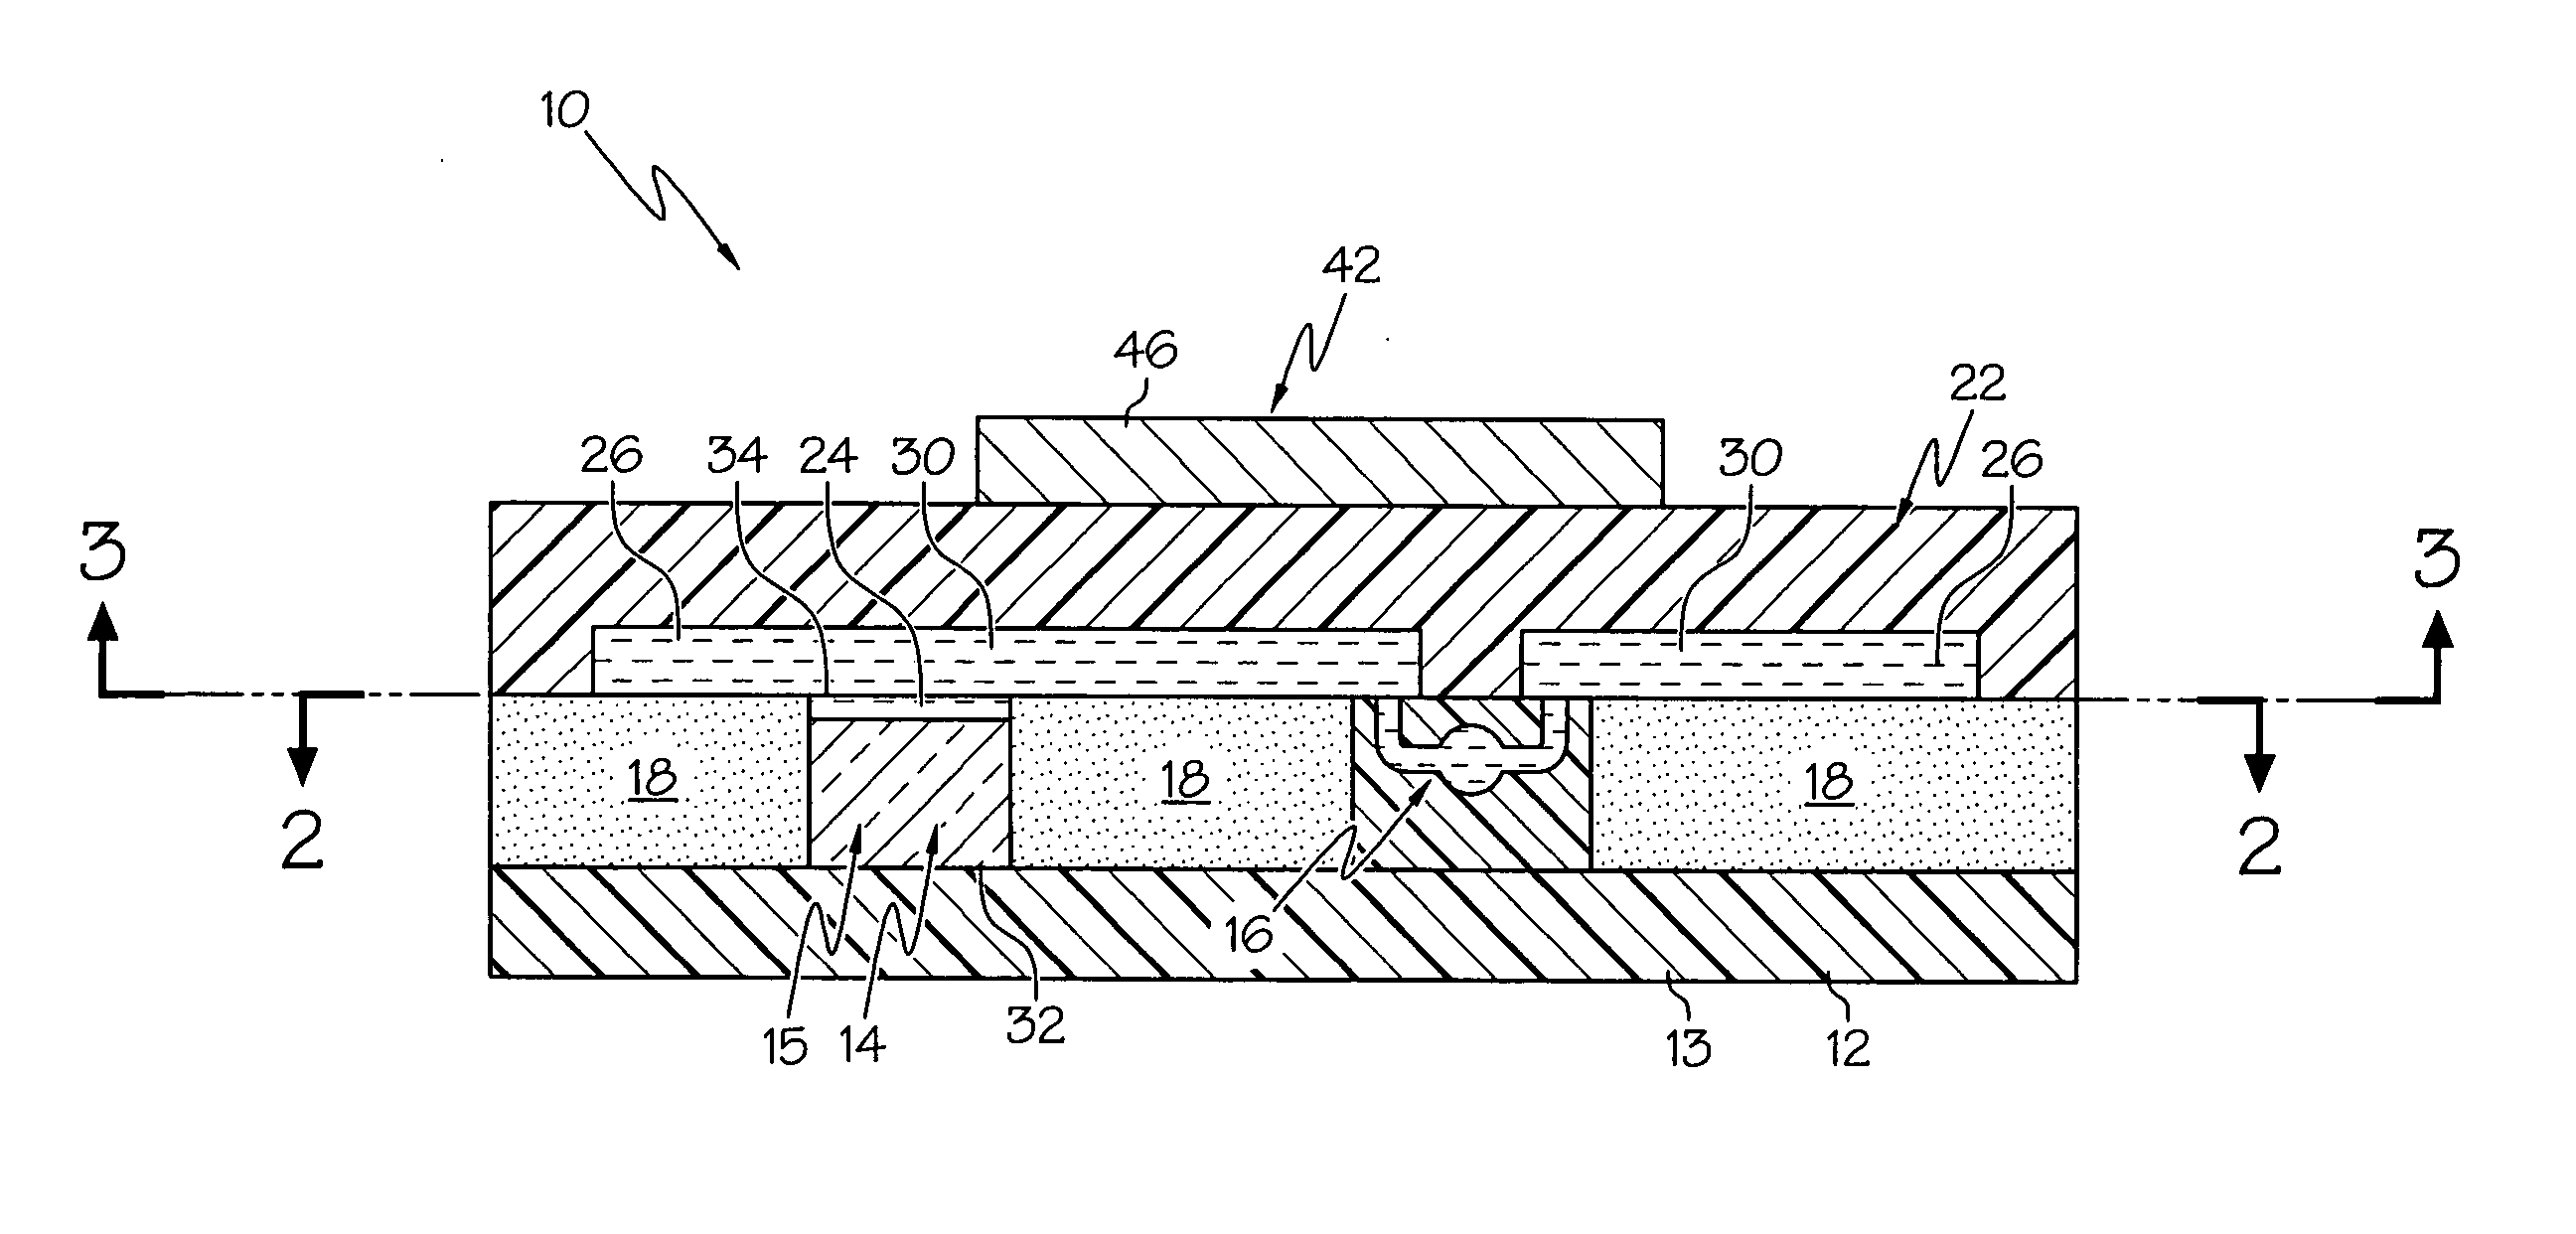 Cooled electronic assembly and method for cooling a printed circuit board